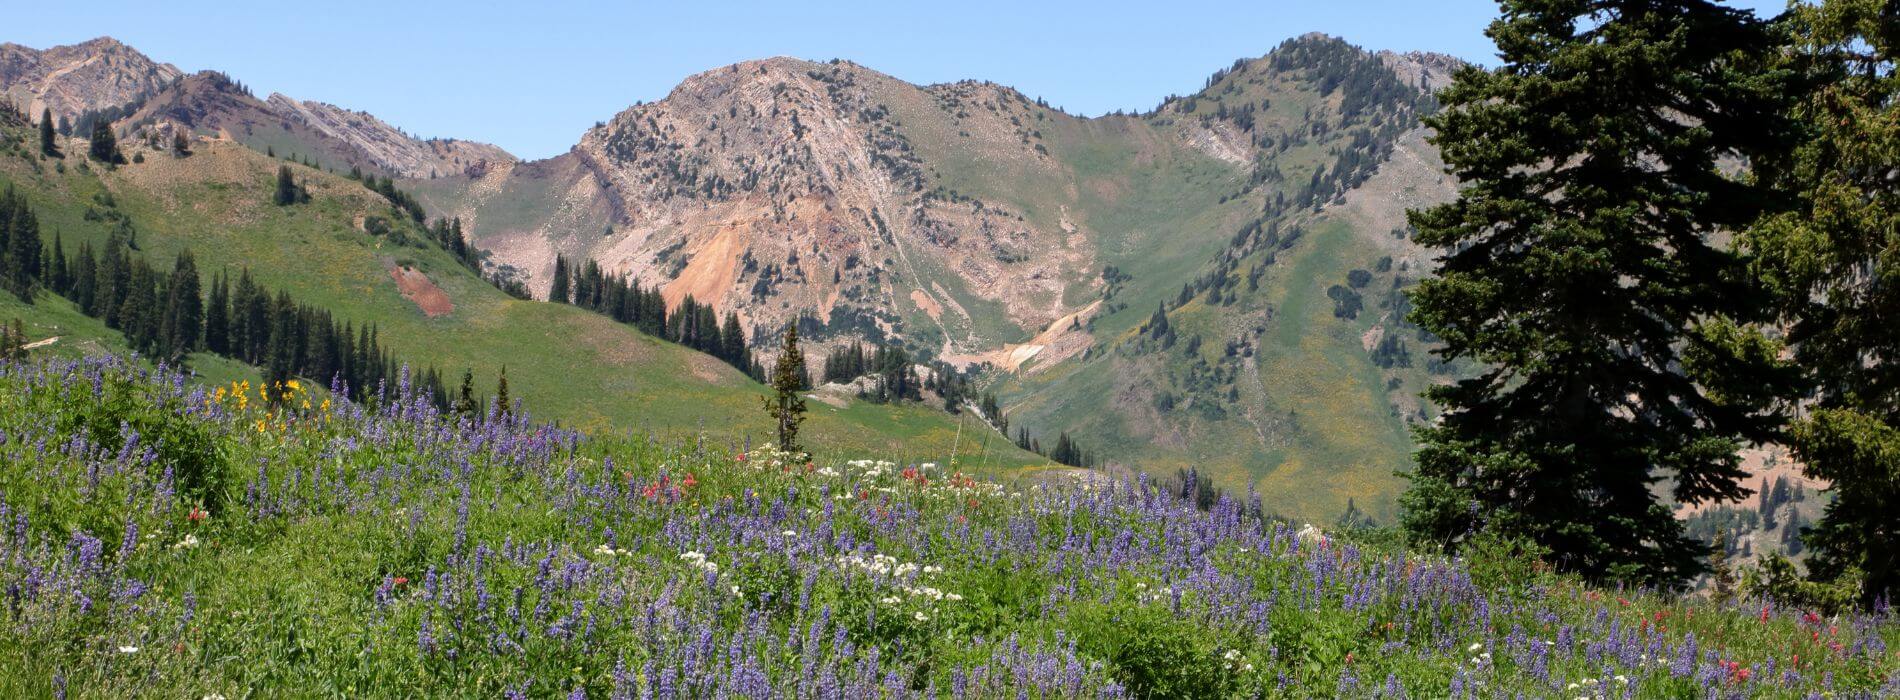 Wasatch Mountains with Wildflowers